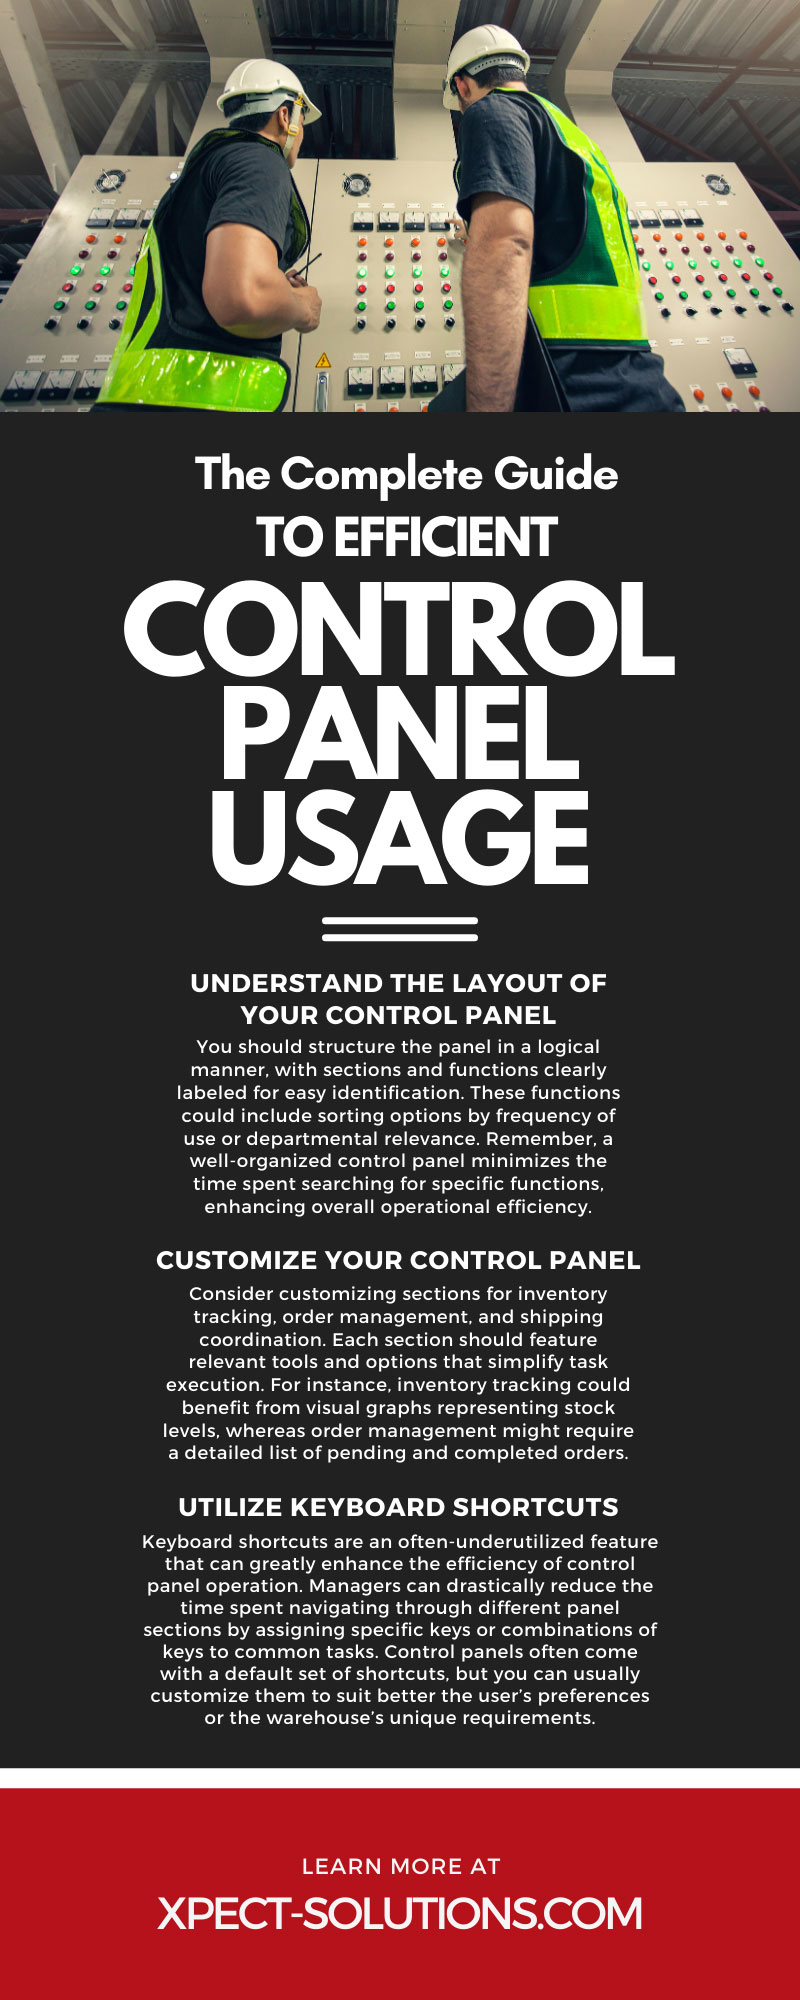 The Complete Guide to Efficient Control Panel Usage
